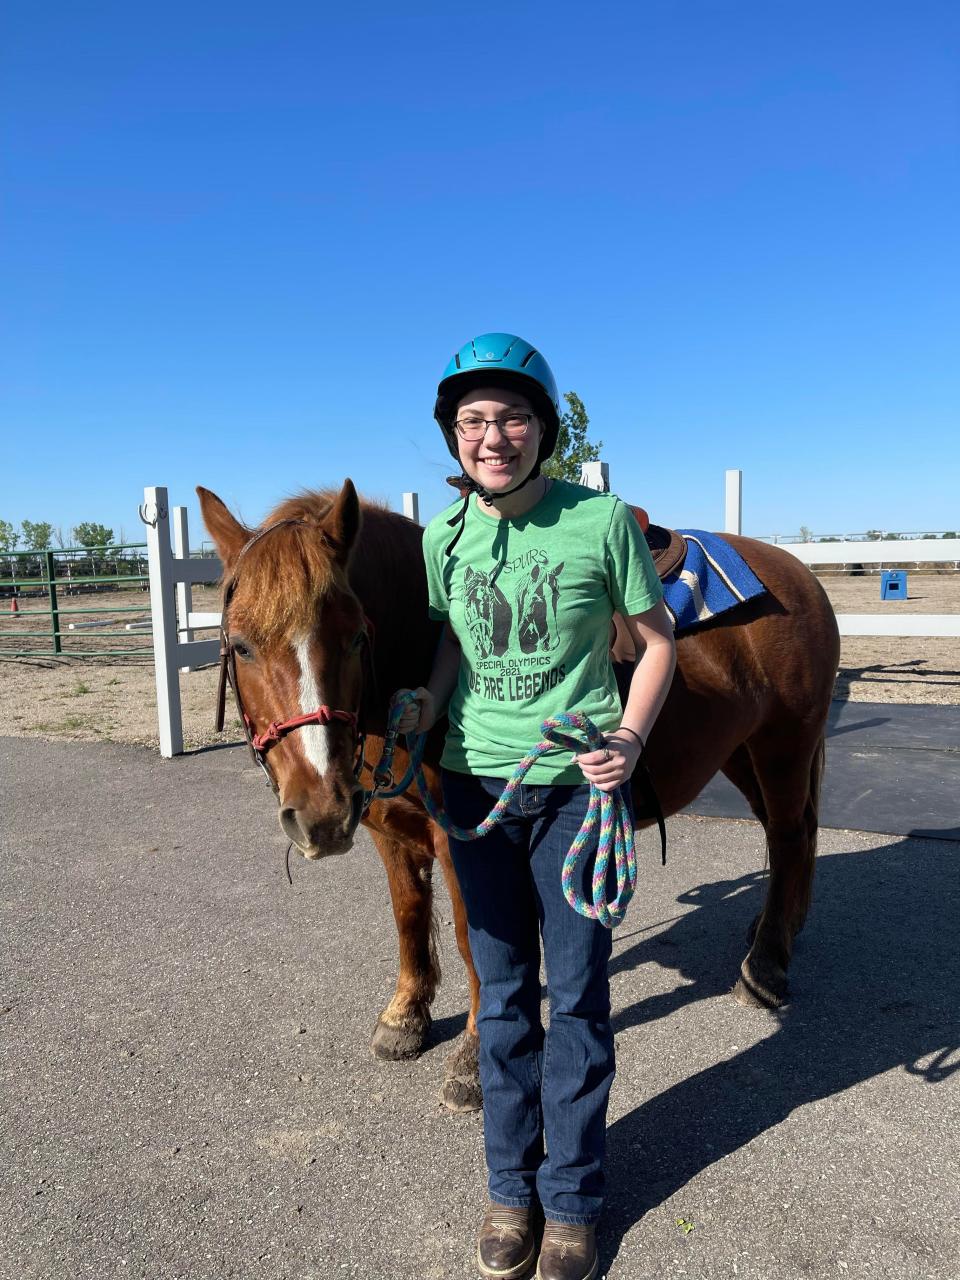 Eschenbaum poses with her horse during a training session at SPURS Therapeutic Riding Center. Eschenbaum is headed to the 2022 Special Olympics USA Games.